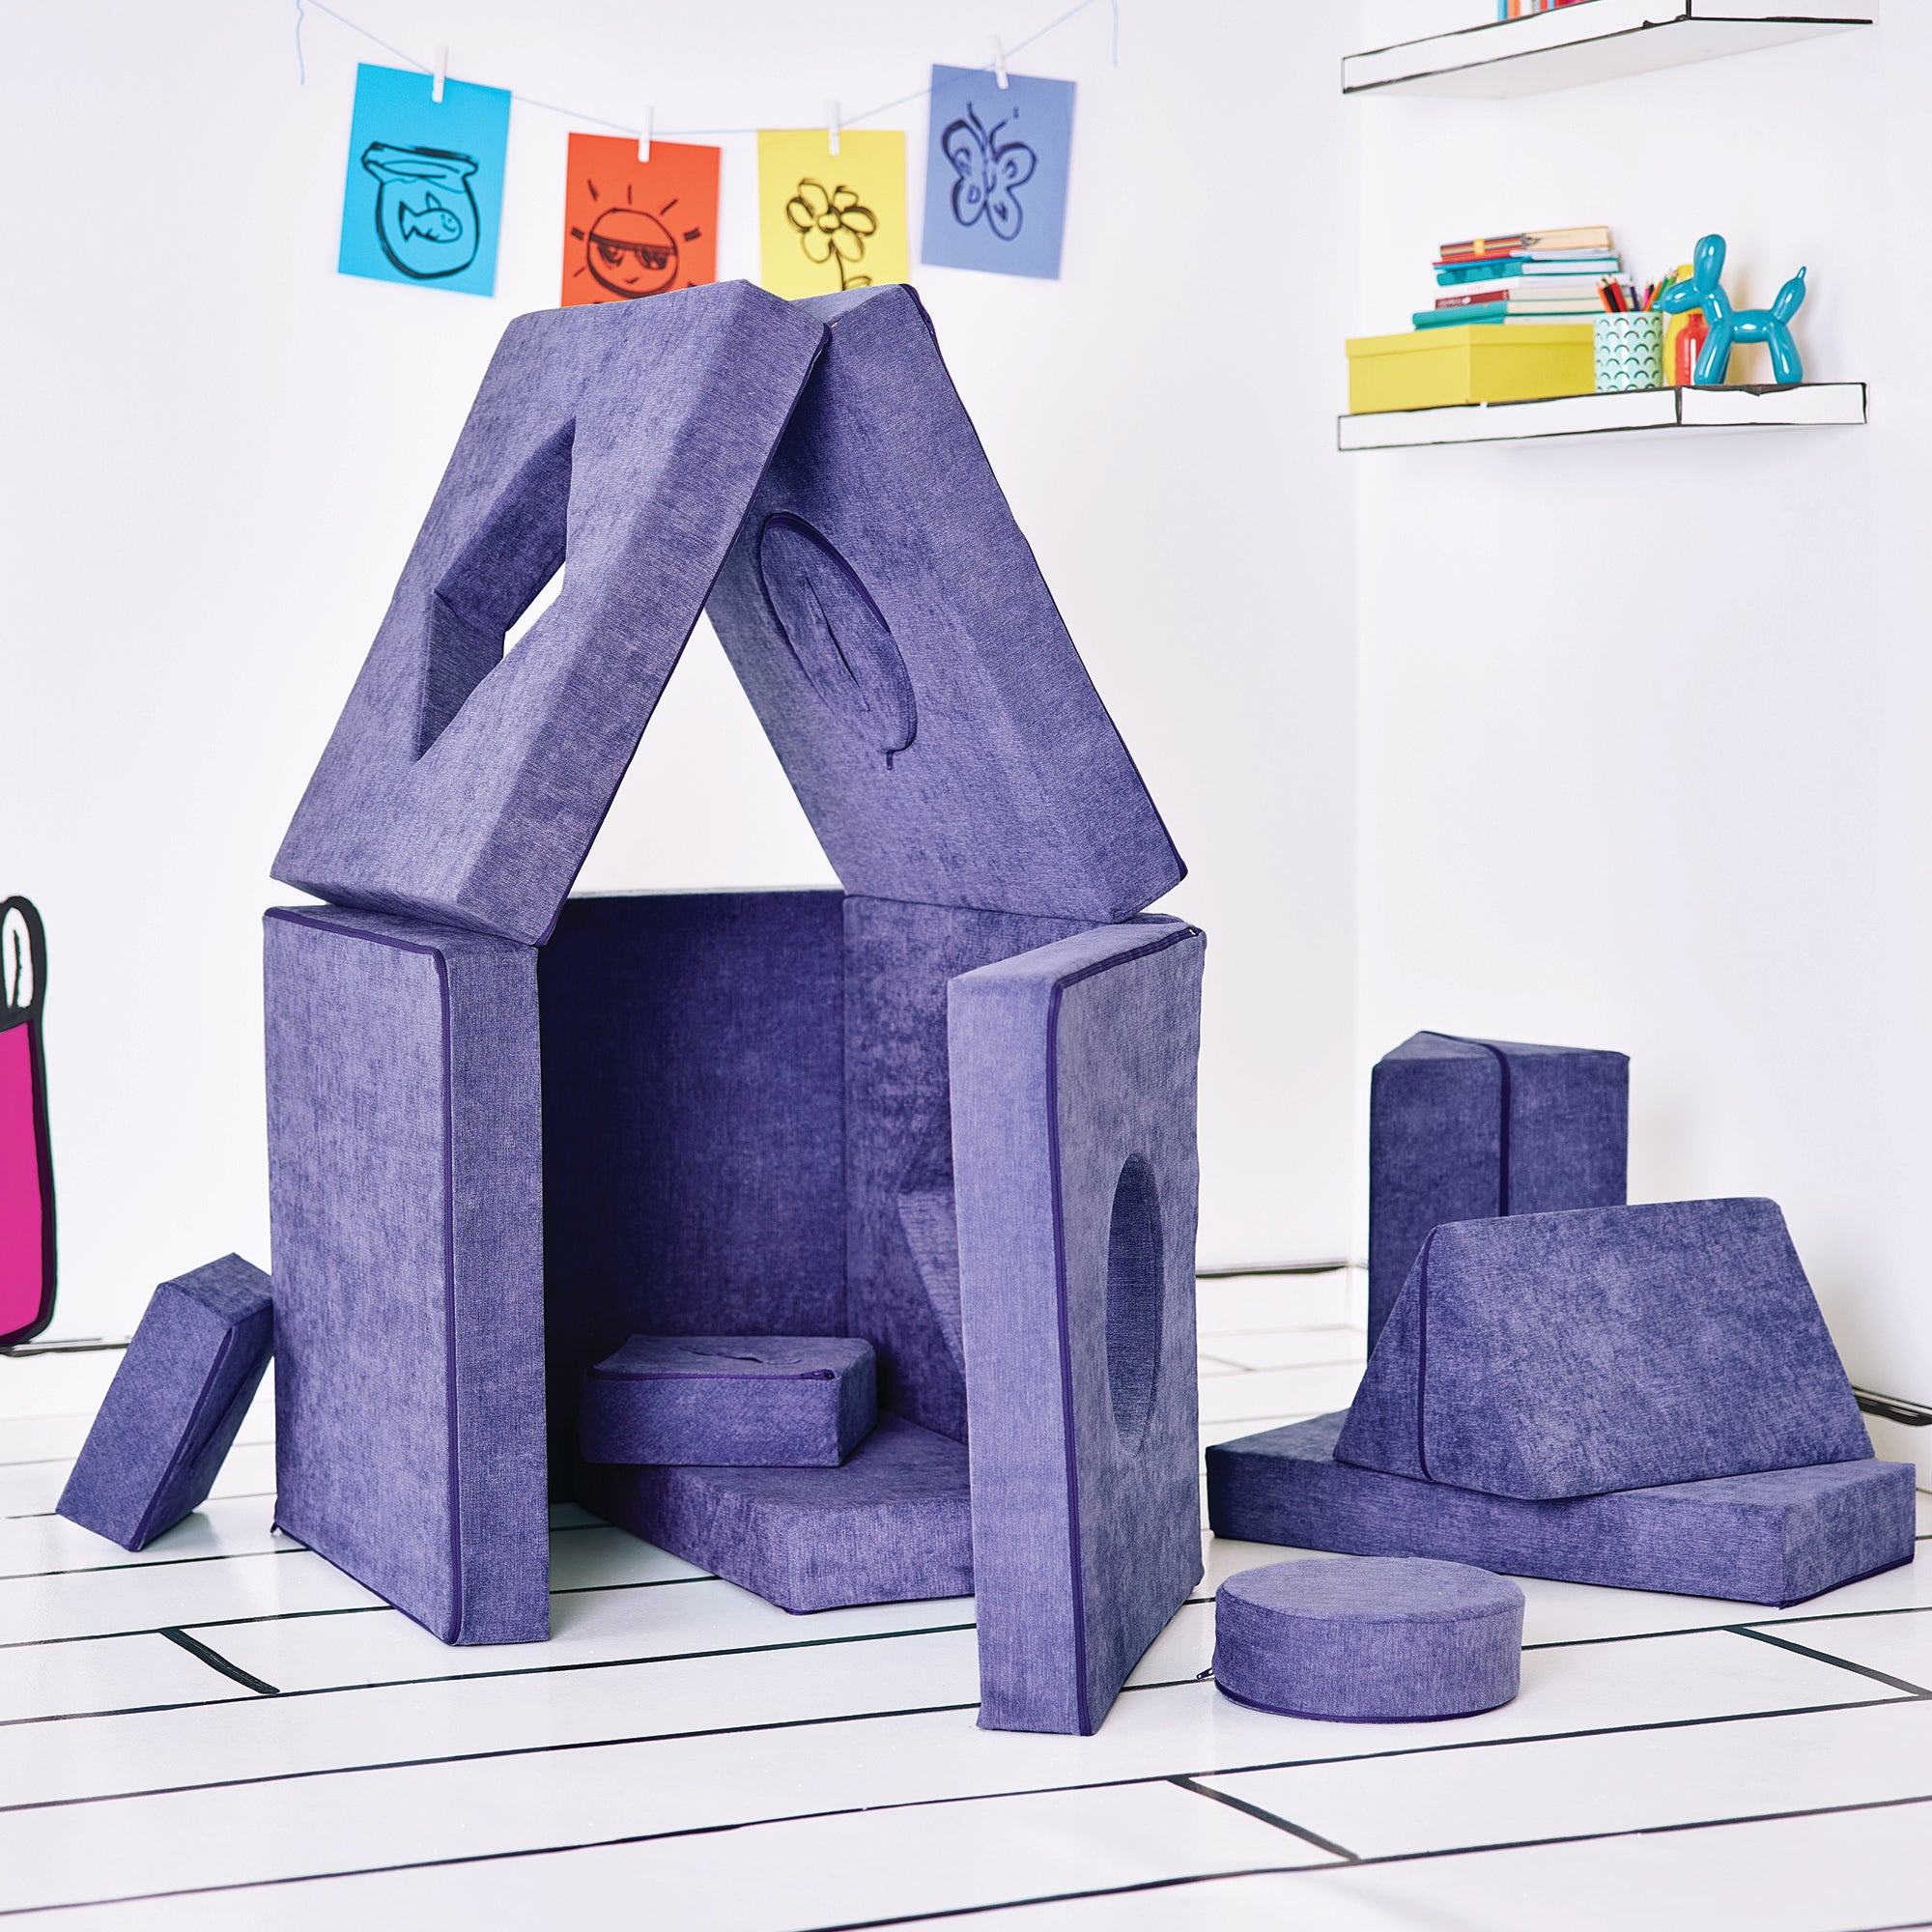 Side-view of the twelve modular pieces of the Yourigami Kids Play Fort in cosmic-purple color formed to create the Home Base configuration